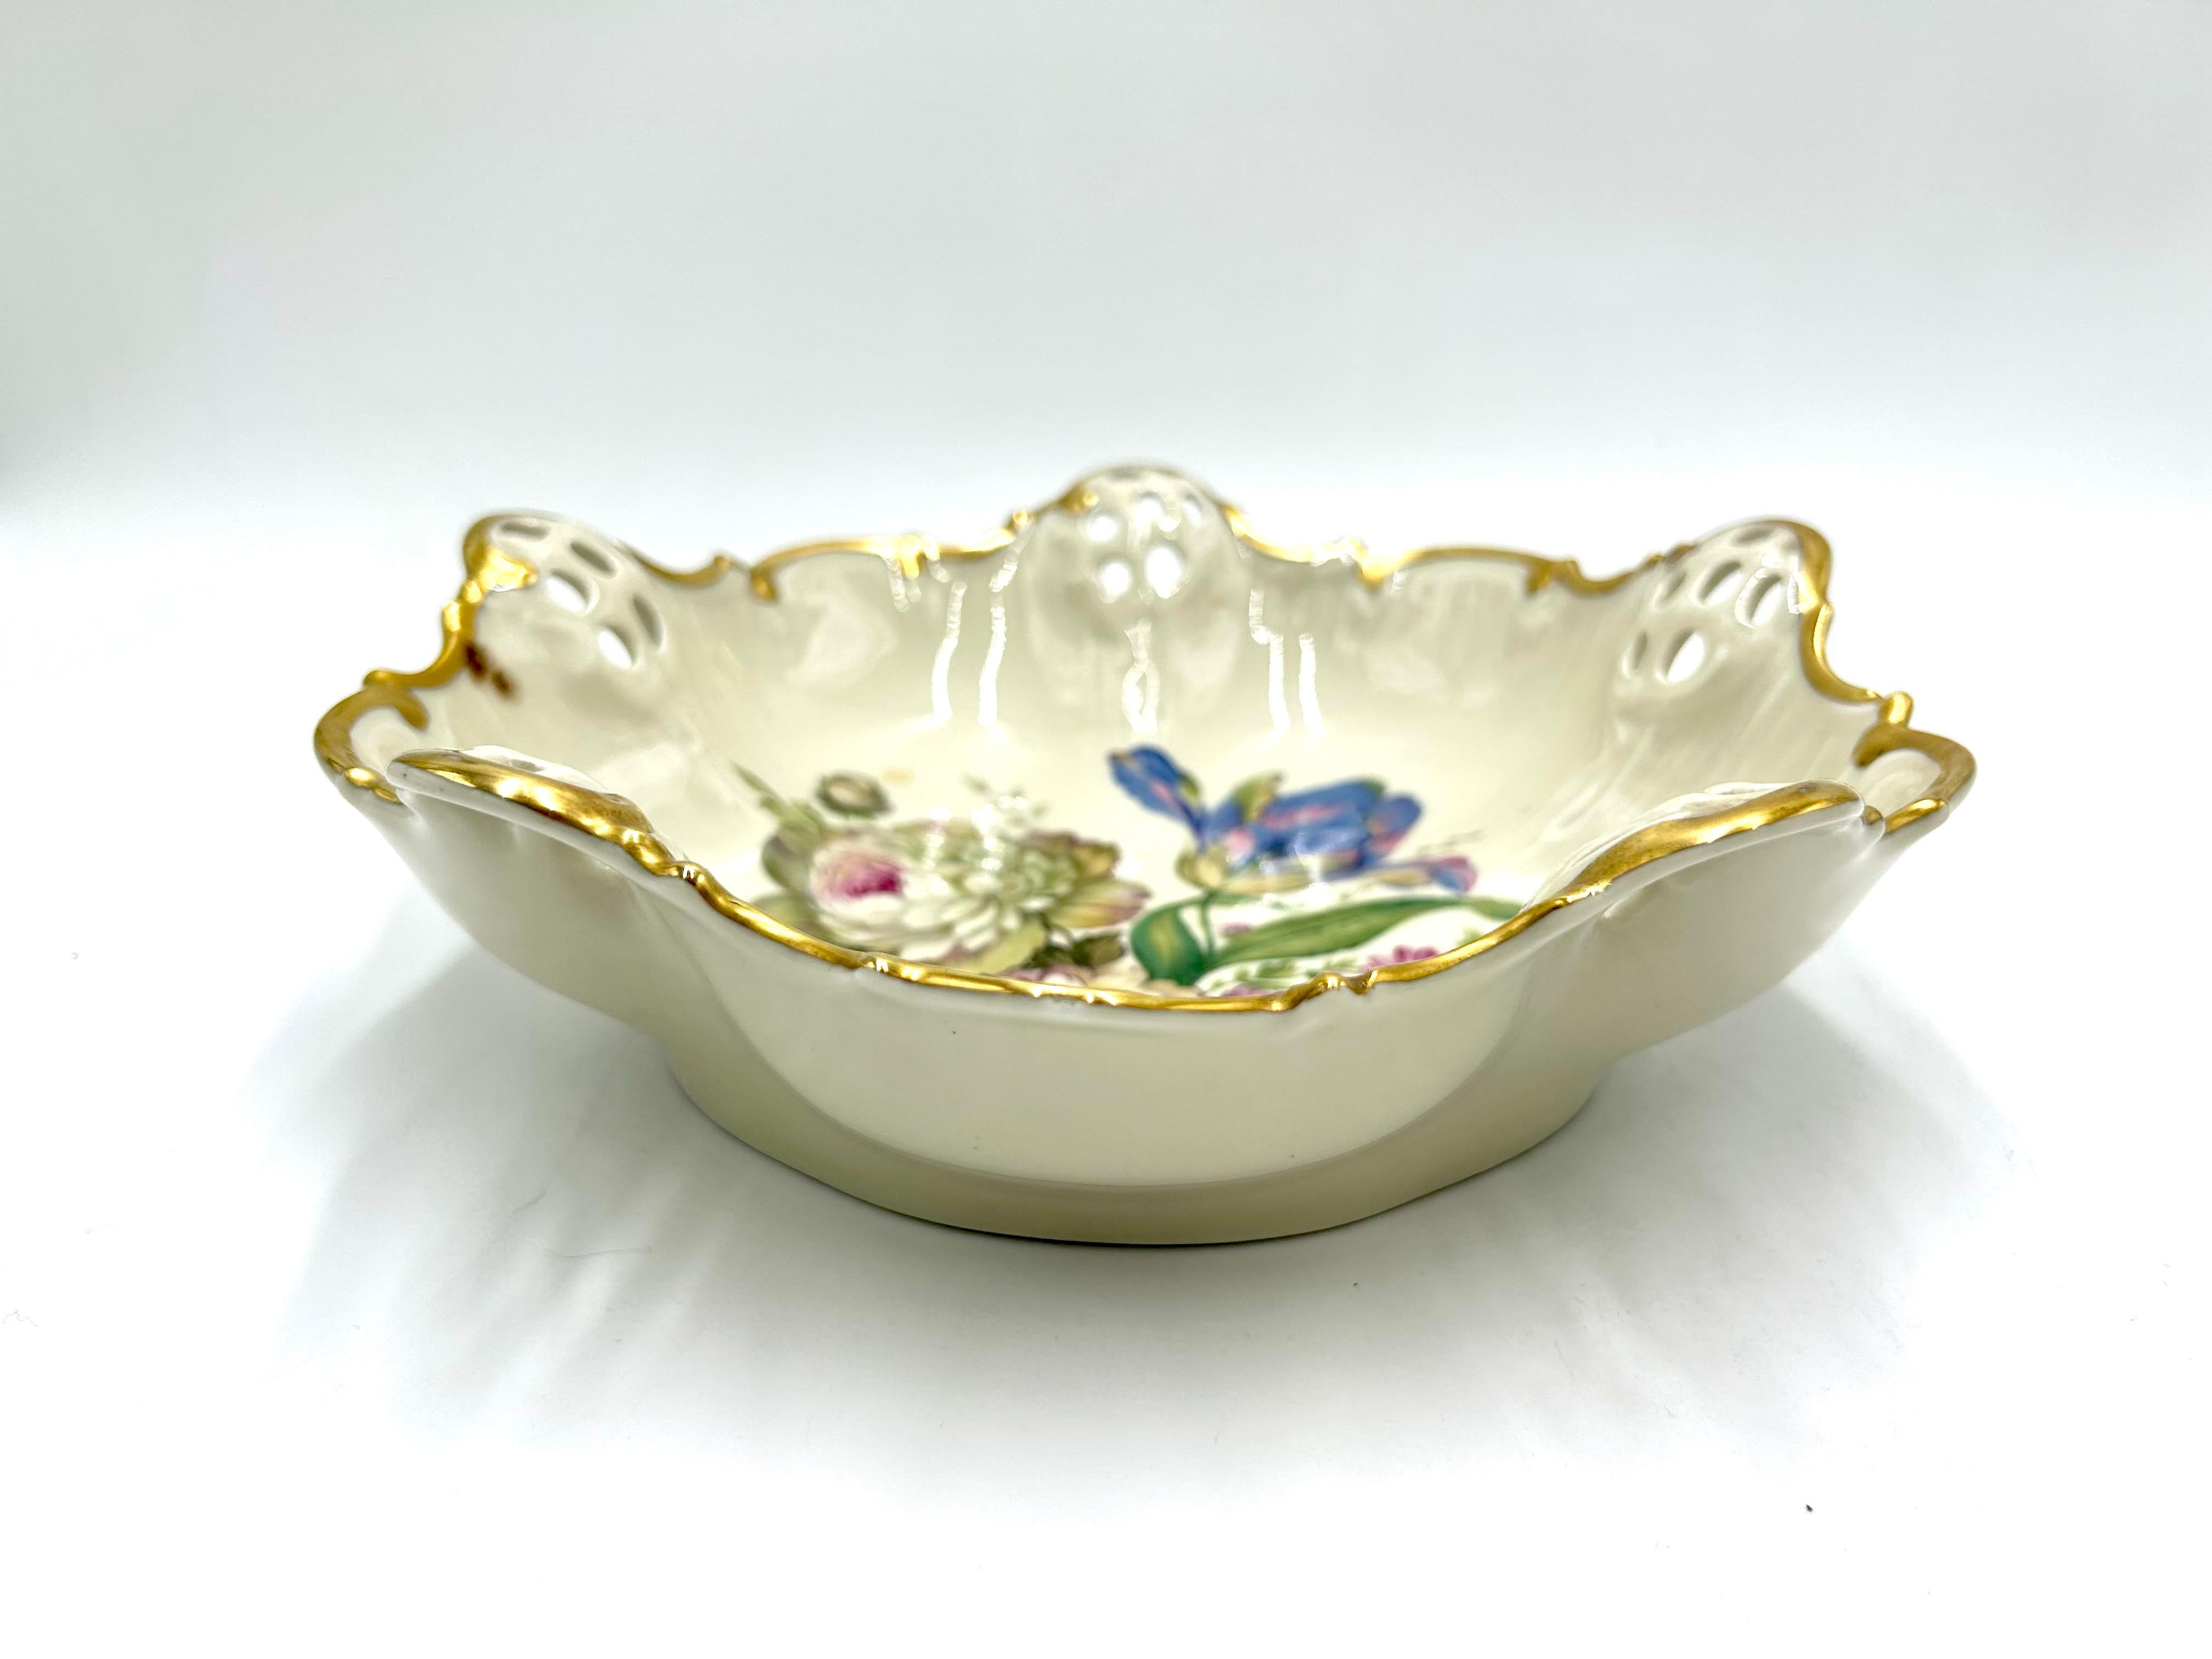 Porcelain openwork bowl made of ecru porcelain, decorated with gilding and a bouquet of flowers motif. A product of the valued German manufacturer Rosenthal from the Moliere series. Signed with the mark used in the years 1938-1952. Very good